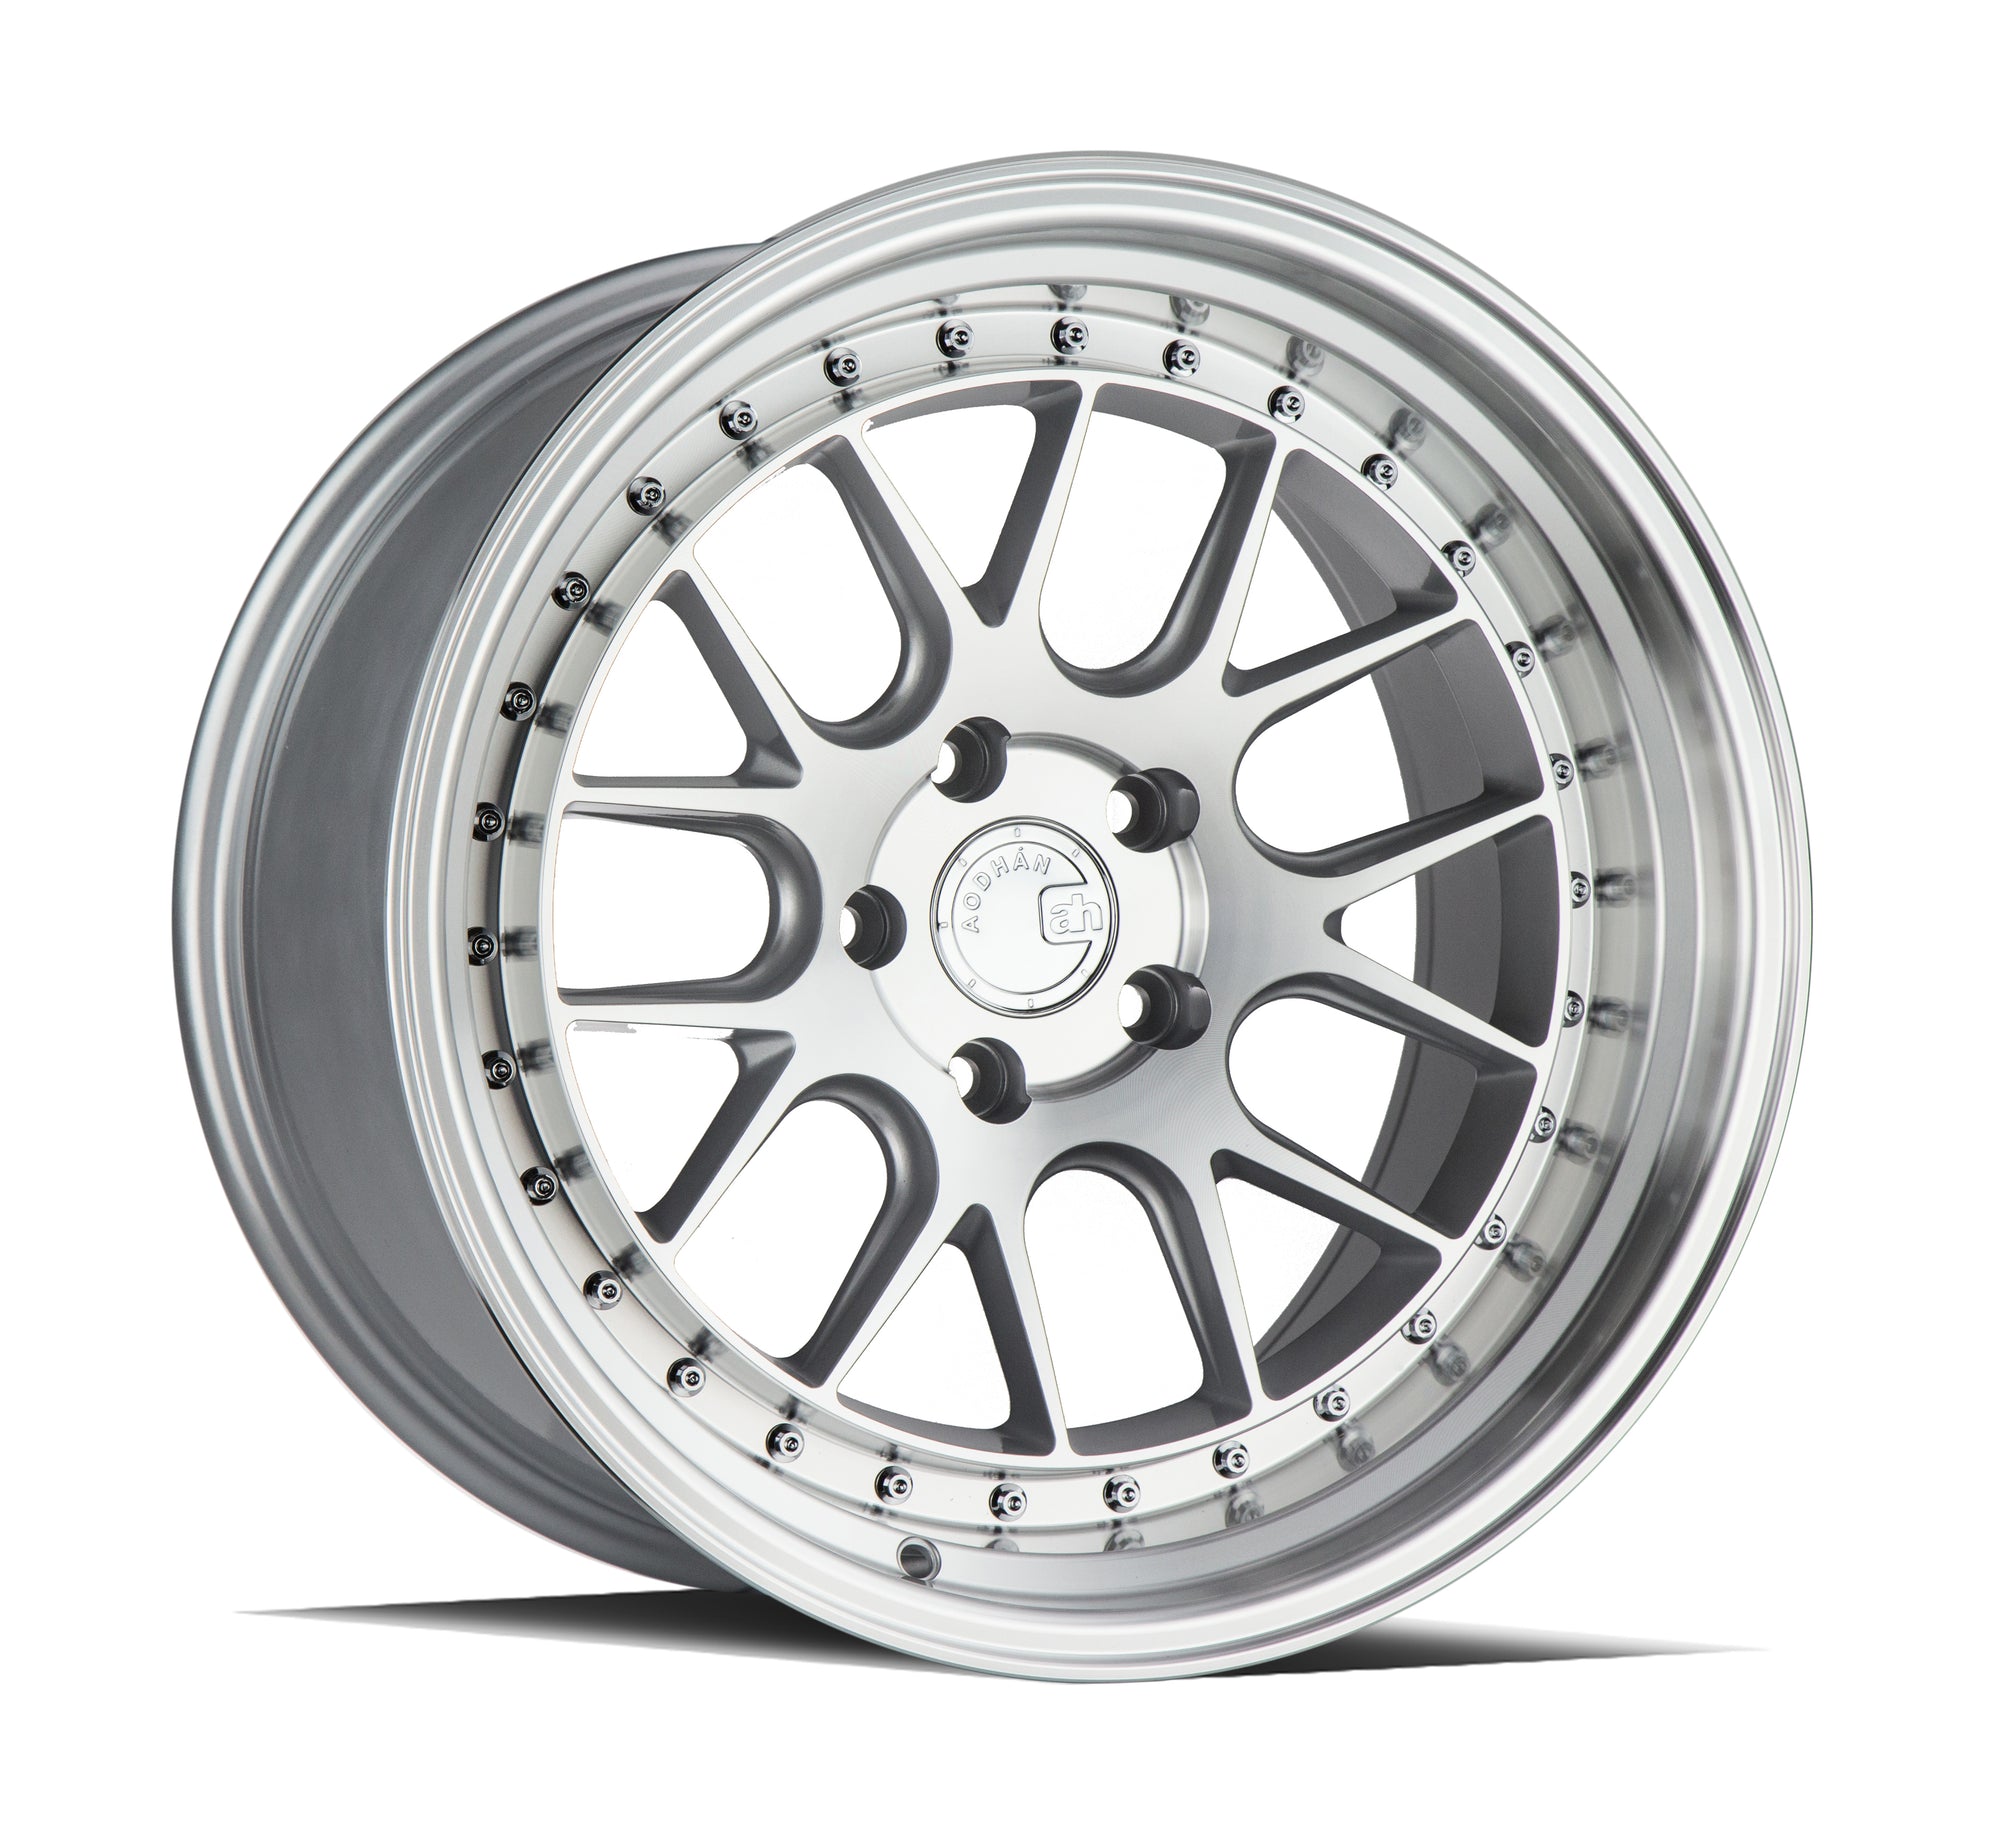 Aodhan DS06 18x10.5 5x114.3 +22 Silver w/Machined Face